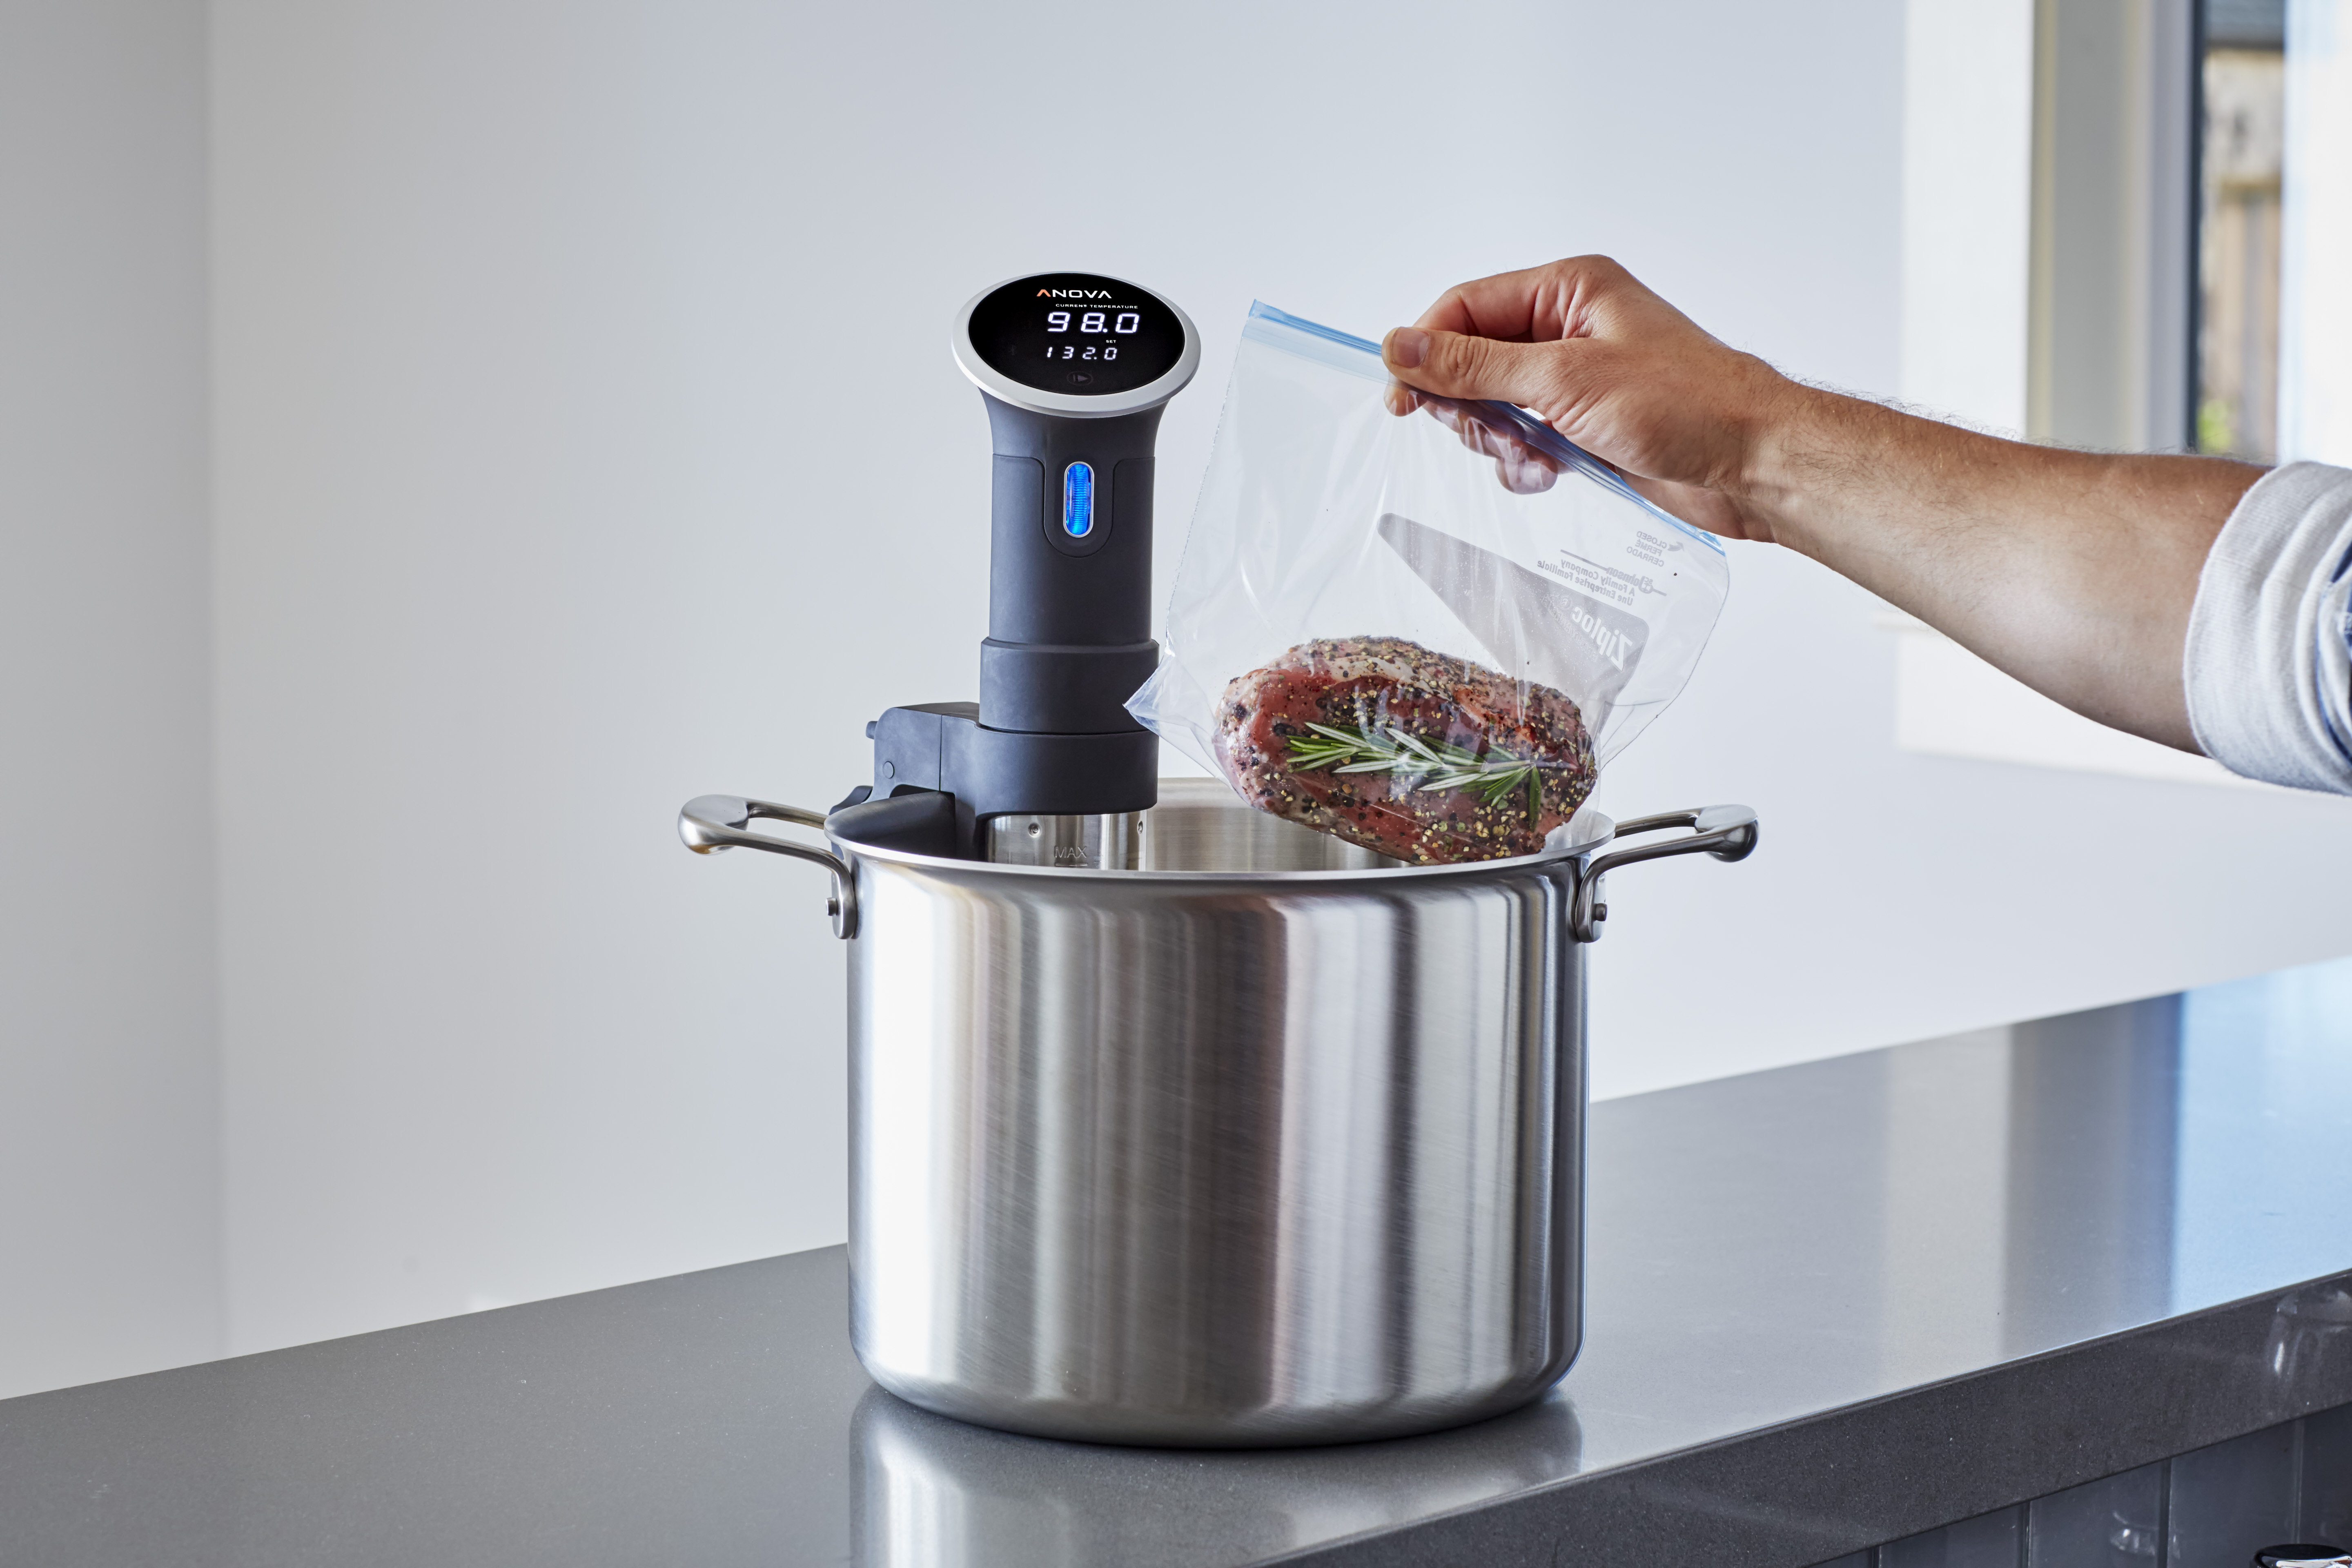 What Is Sous Vide Cooking? Learn More About Sous Vide Today - Sous